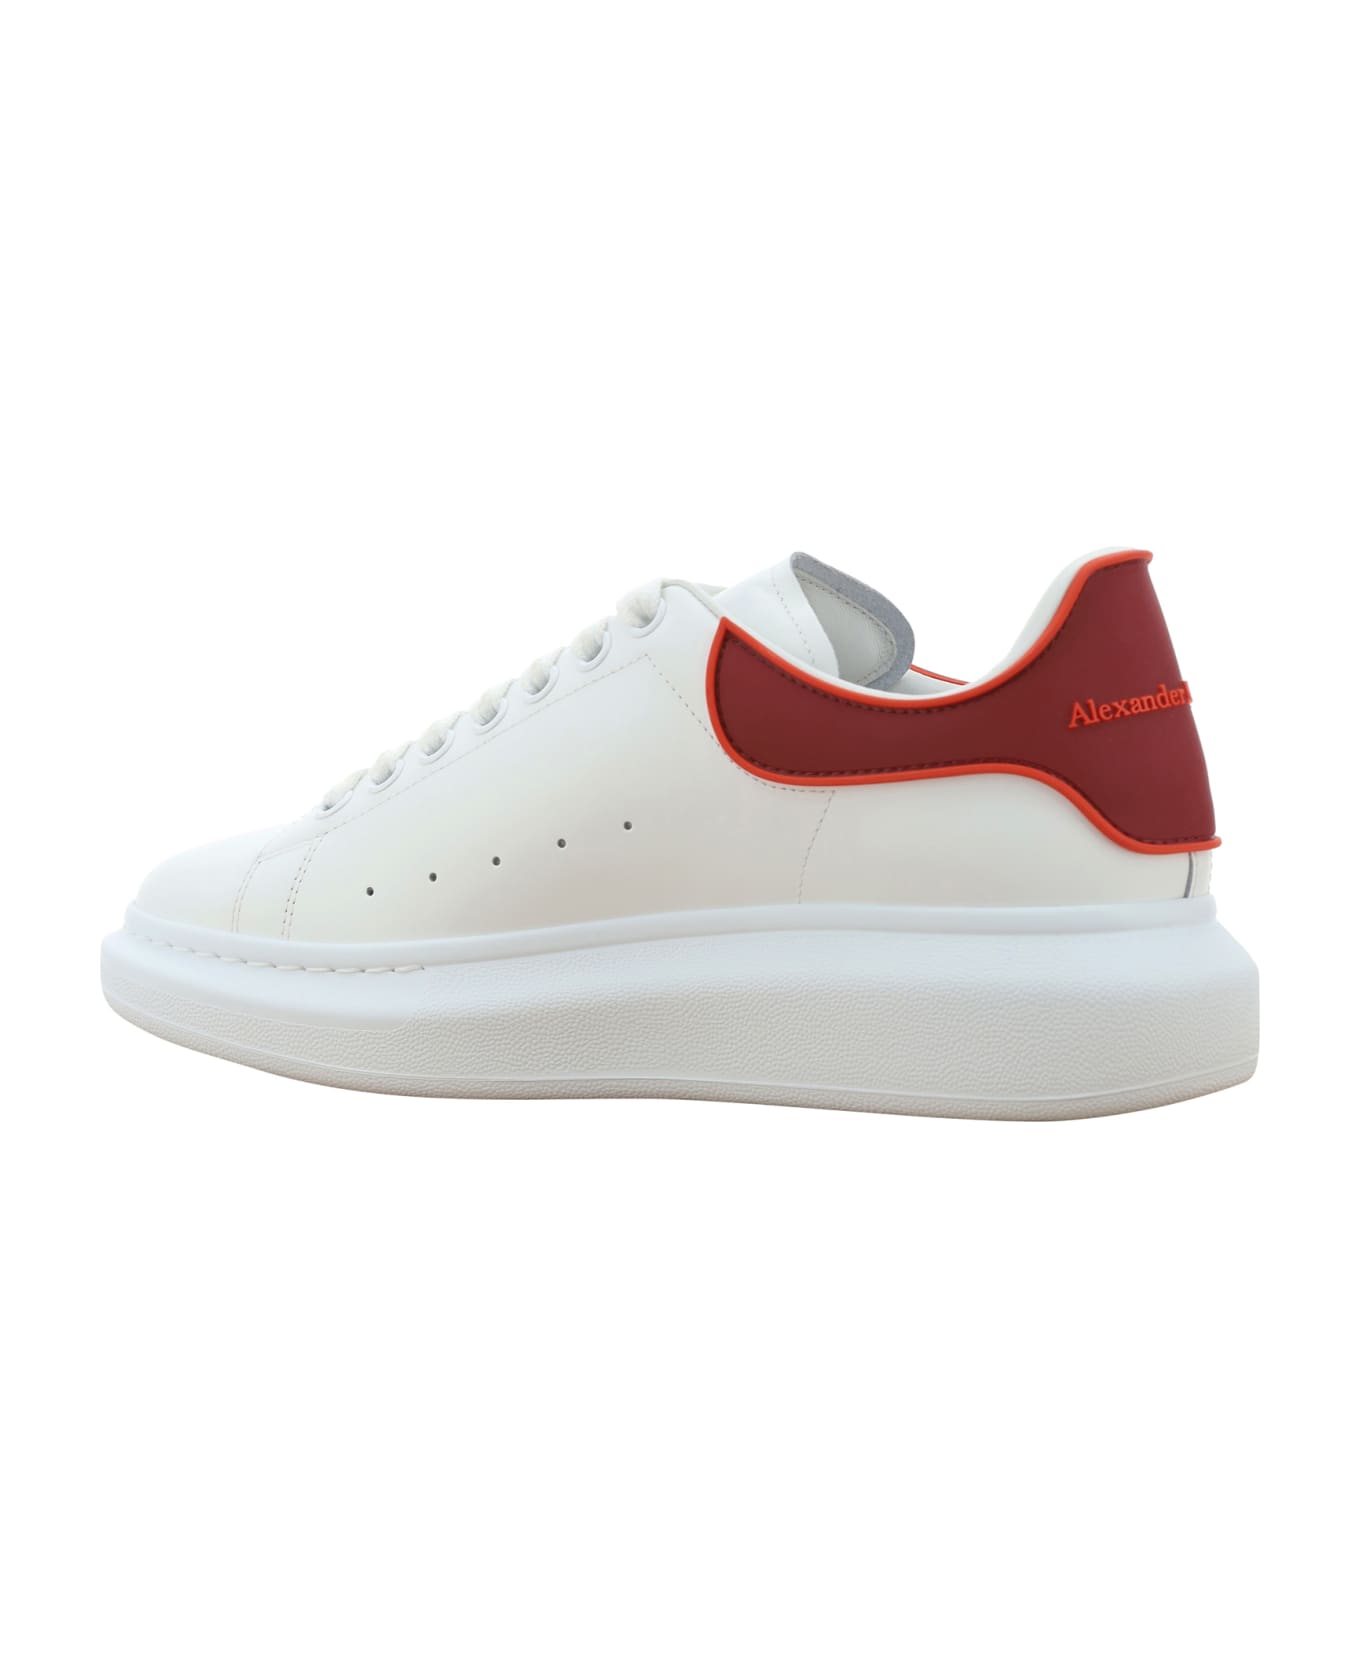 Alexander McQueen Calfskin Sneakers - White/ro.red/sca Red